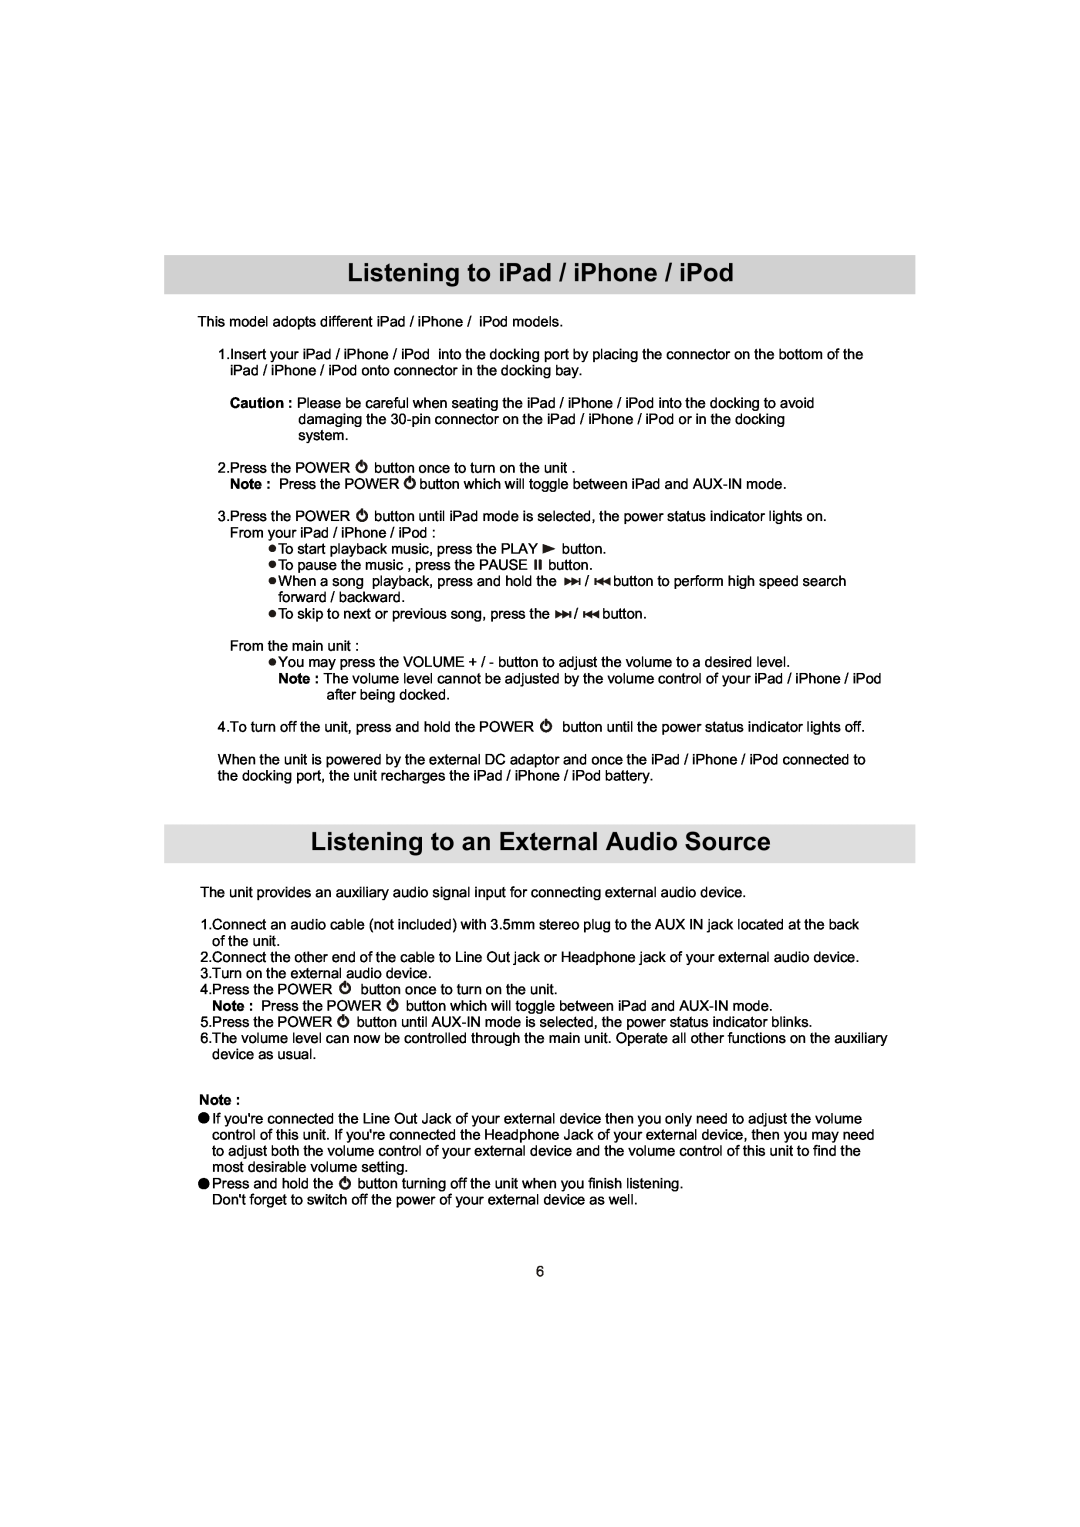 Haier IPD-01 manual Listening to iPad / iPhone / iPod, Listening to an External Audio Source 